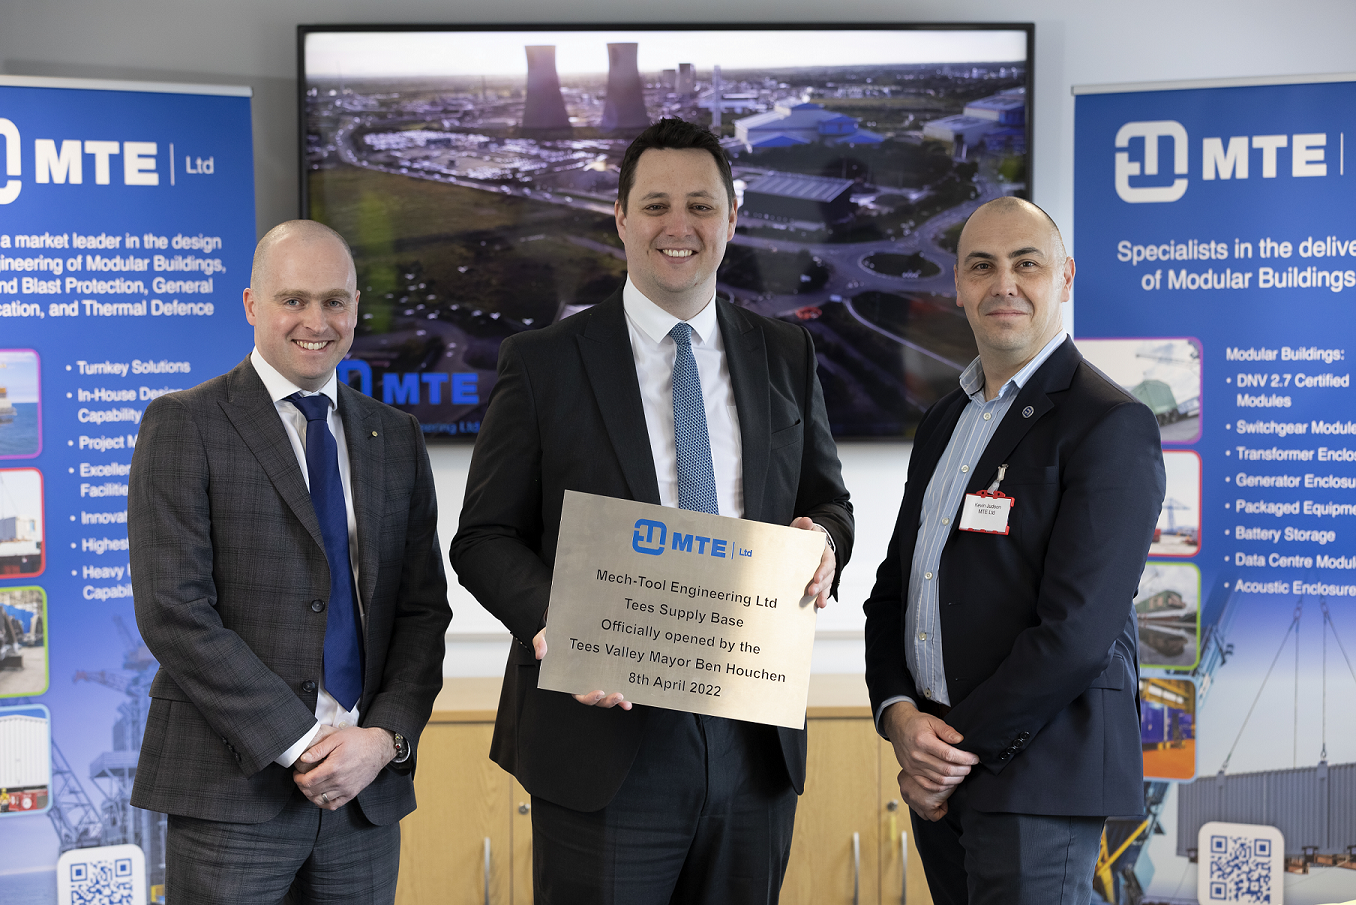 MEMBER NEWS: MTE’s new quayside facility officially opened by mayor, Ben Houchen